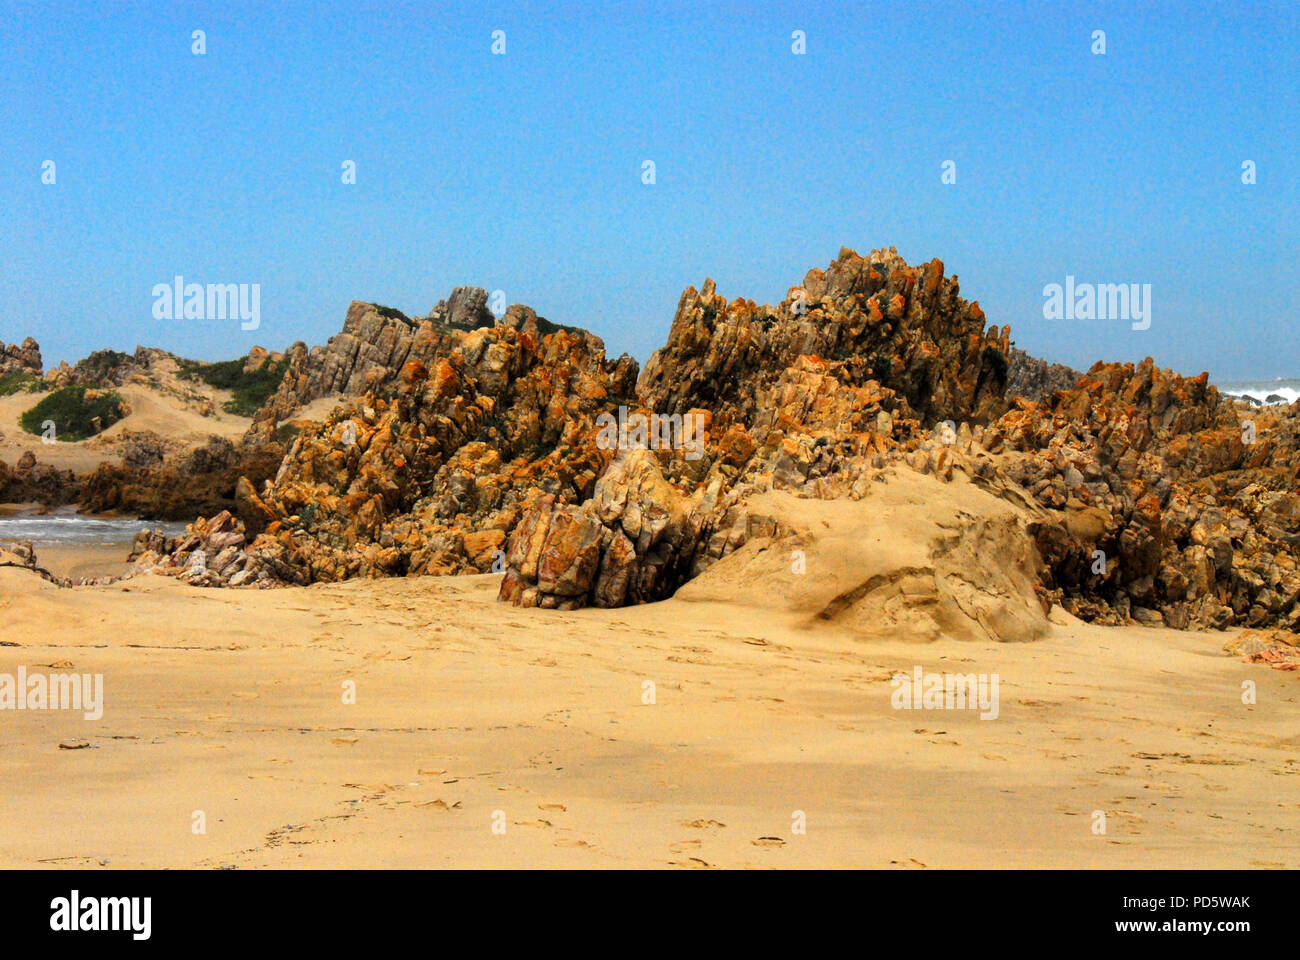 The volcanic rock jutting up on the beach near Knysna, South Africa creates a beautiful background with plenty of space for text. Stock Photo